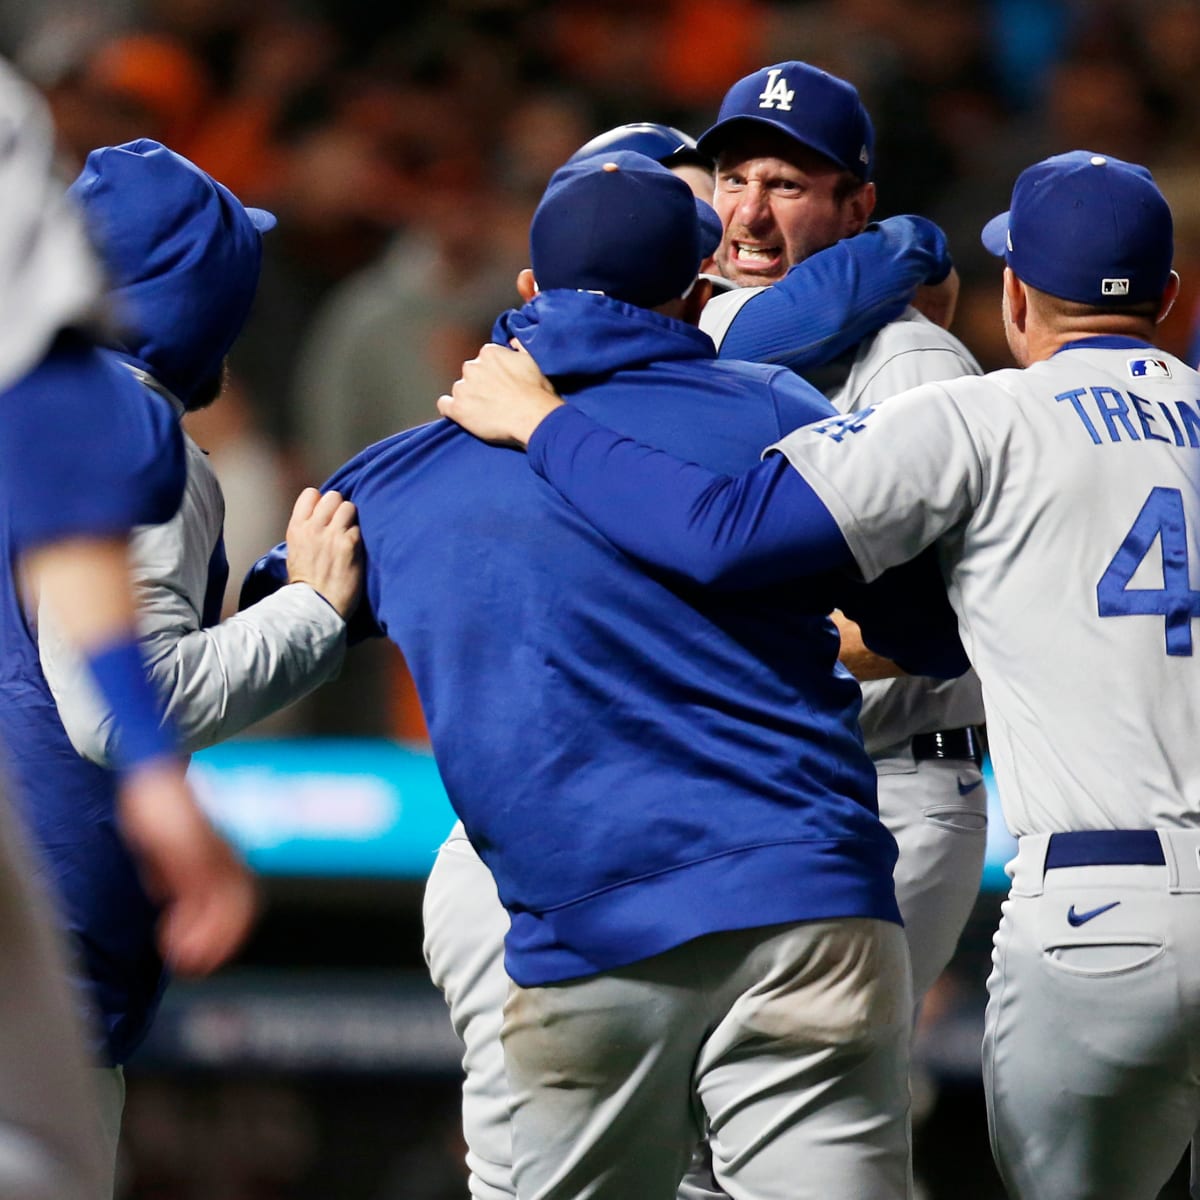 It wasn't how he envisioned it, but Kenley Jansen turned back the